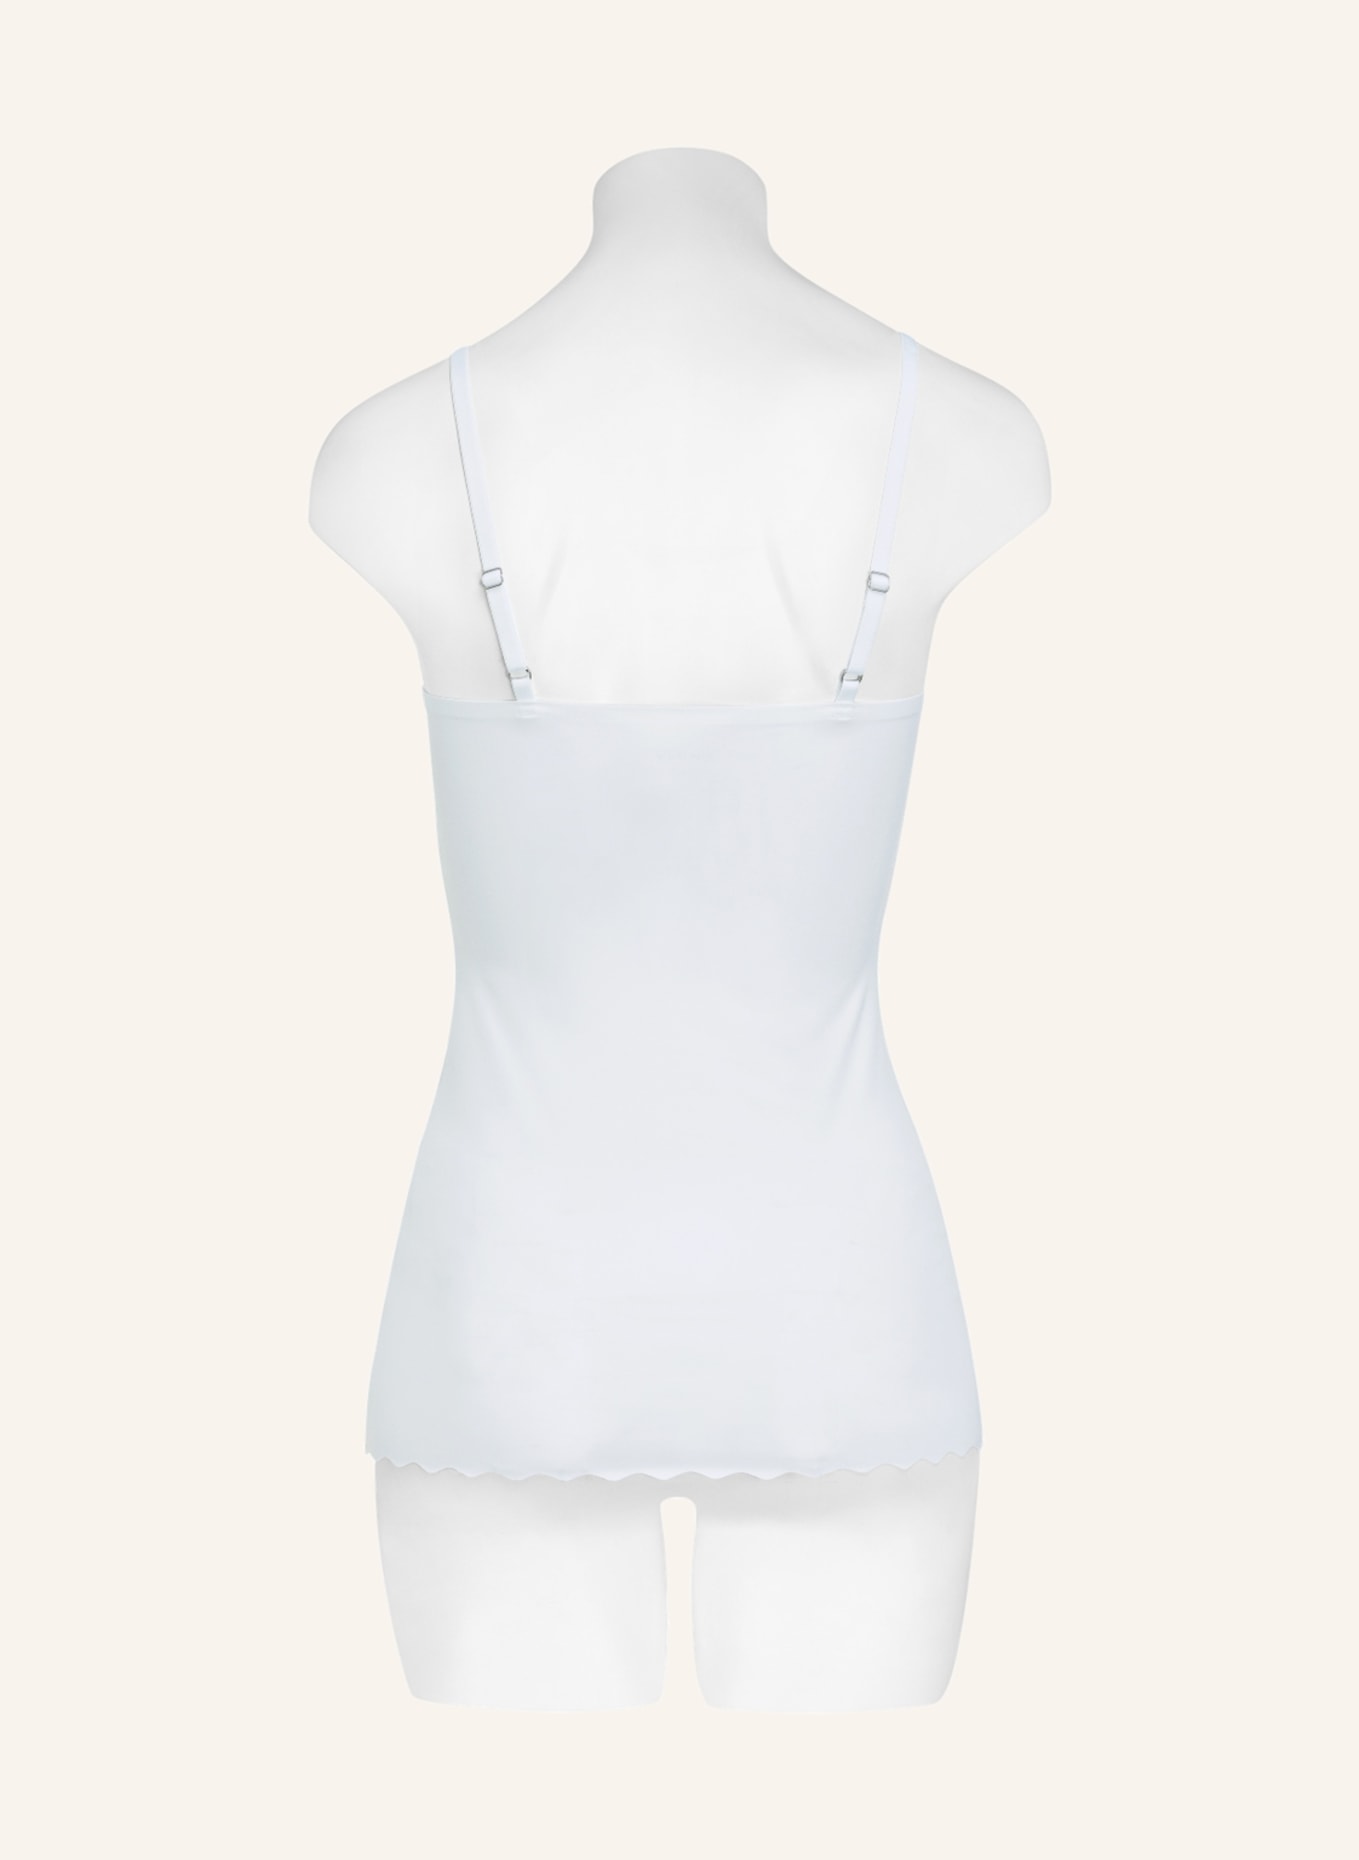 Skiny Top MICRO LOVERS, Farbe: WEISS (Bild 3)